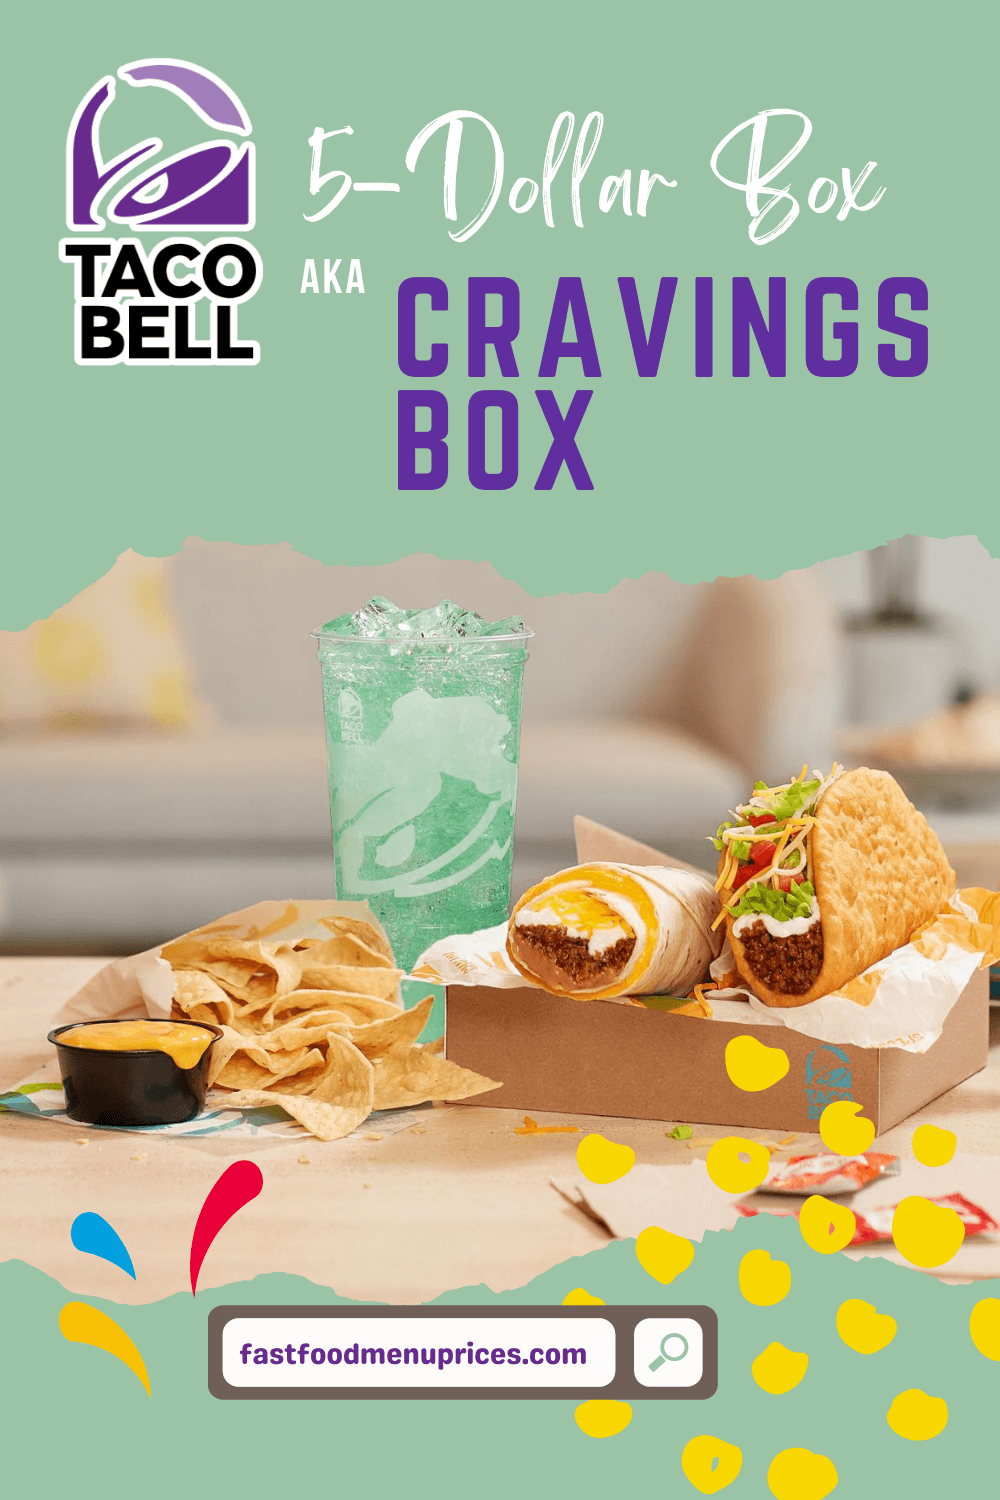 Taco Bell's e-dollar box, the ultimate cravings box.